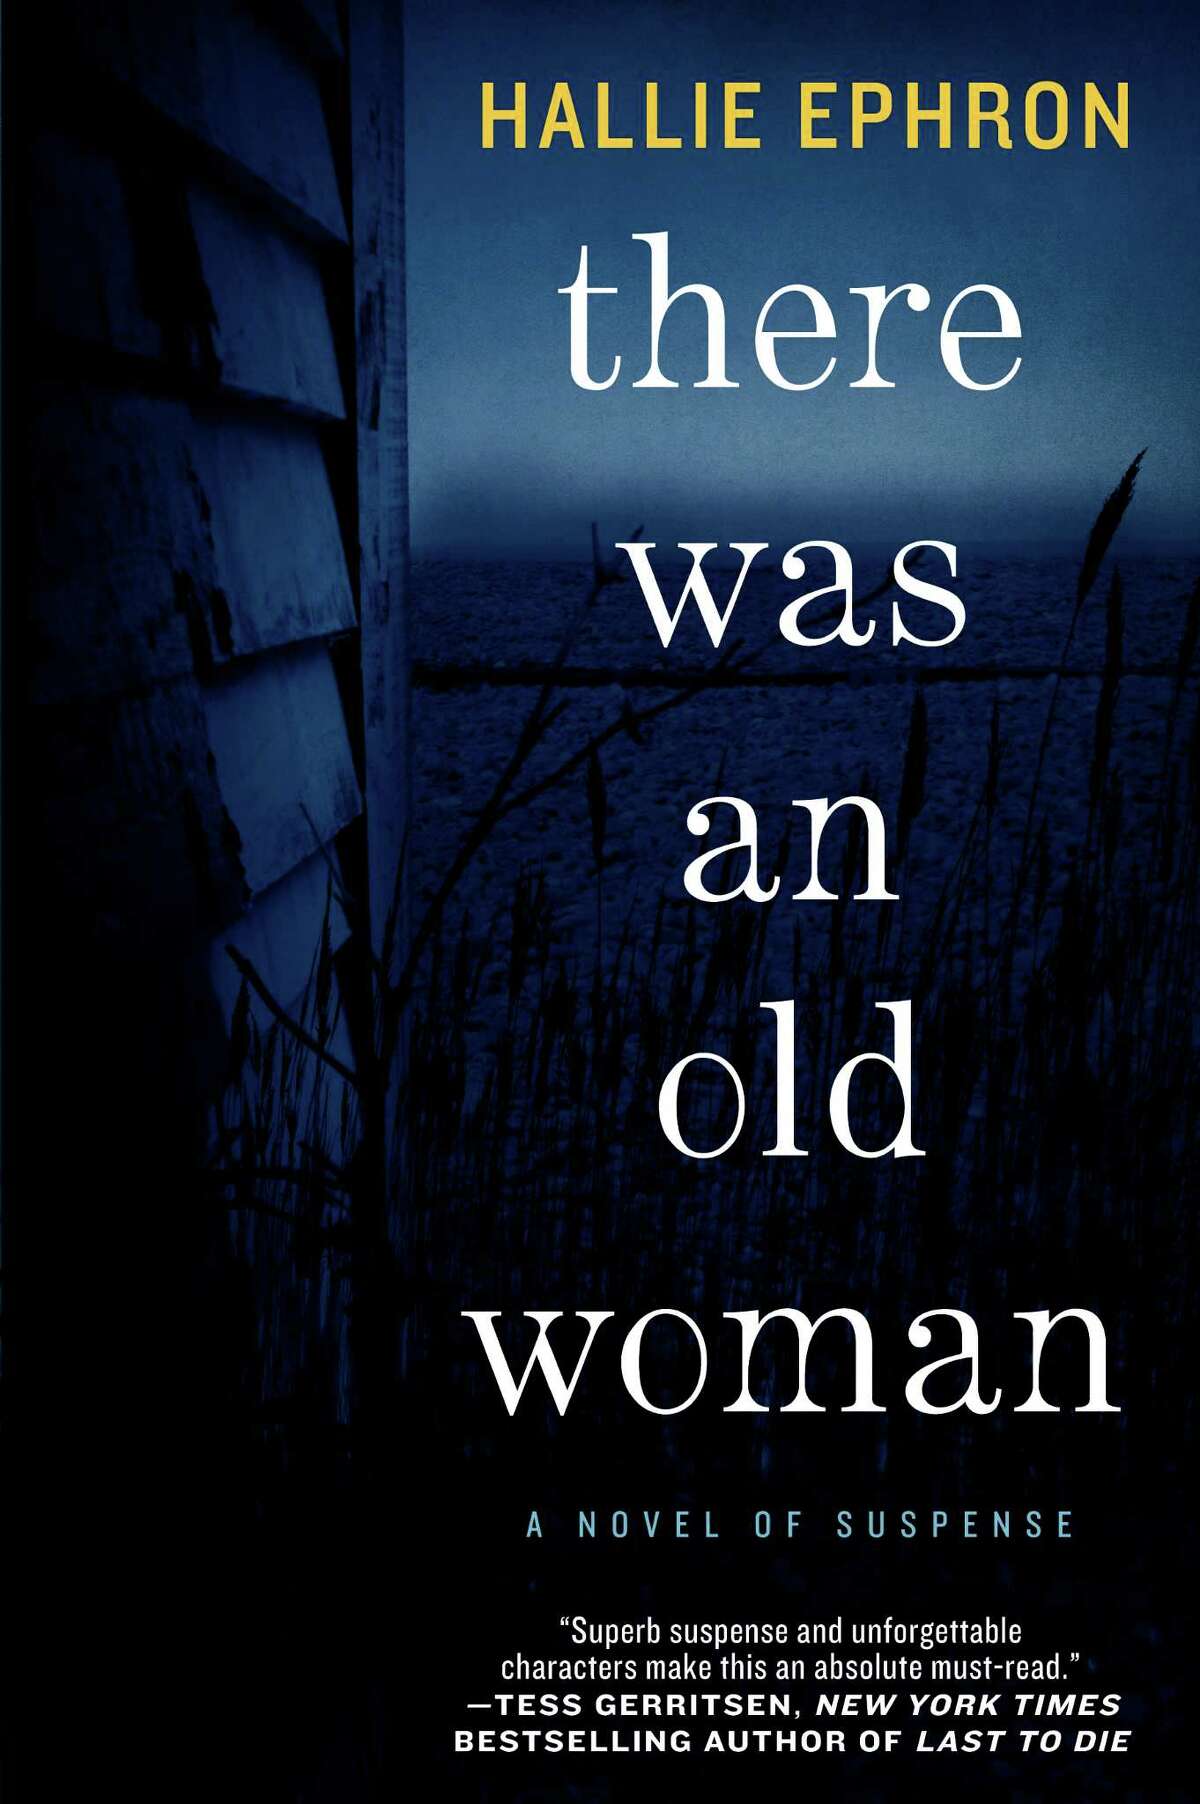 Sinister forces are at work on a quiet street in the Bronx in the latest suspense novel by Hallie Ephron, "There Was an Old Woman."